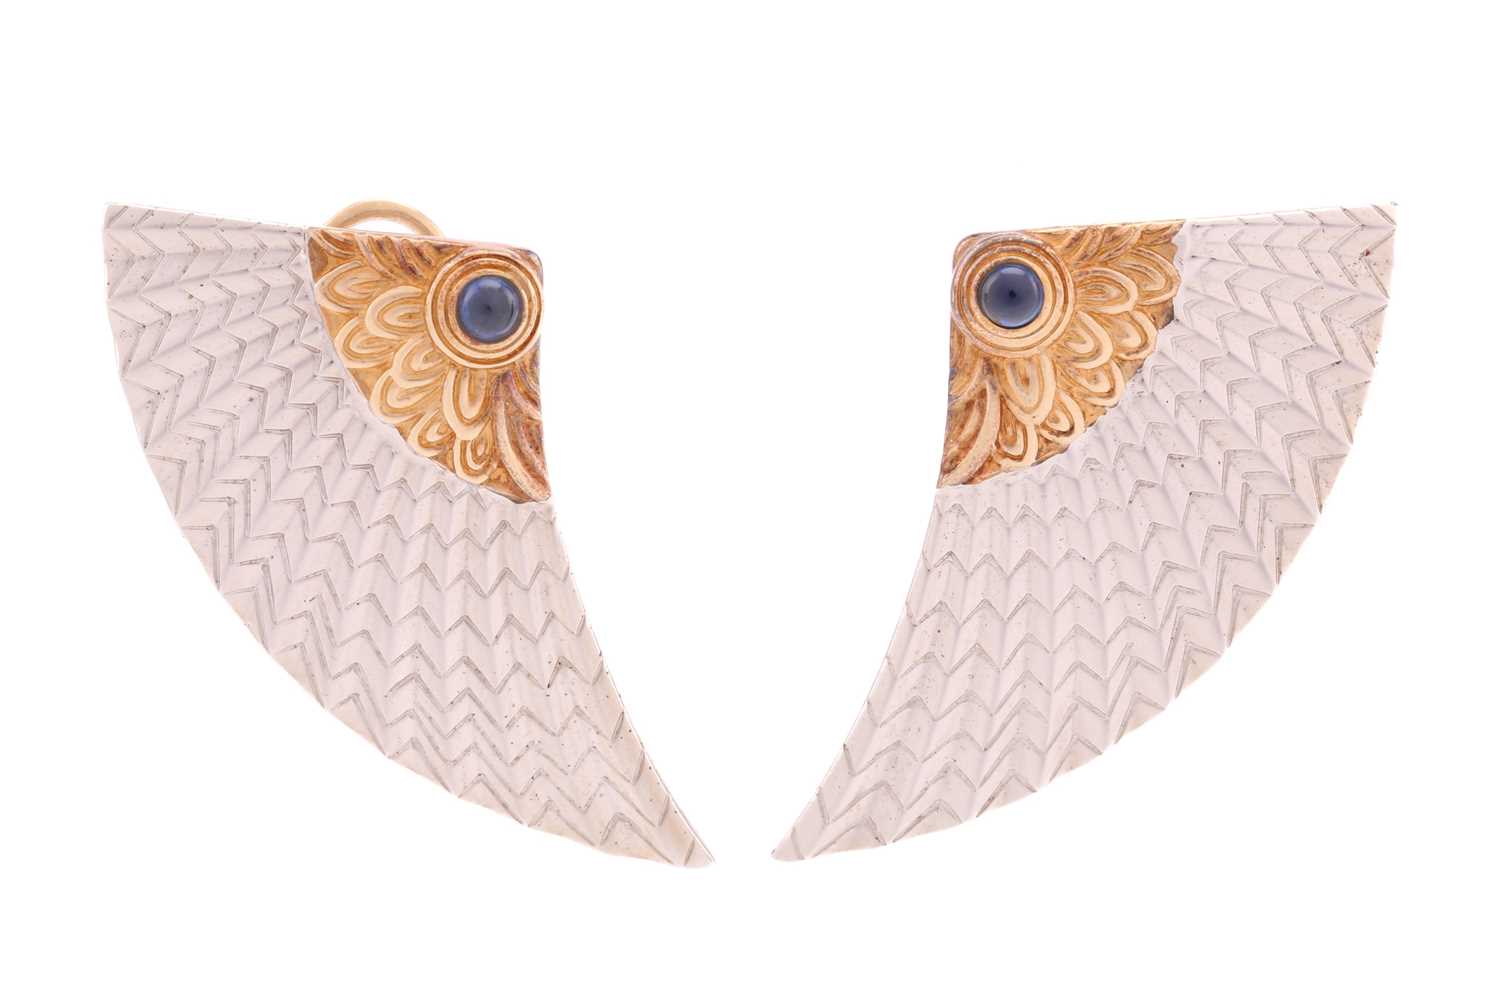 A pair of Erté 'Nile' earrings, each comprises round sapphire cabochon accents on the bi-coloured